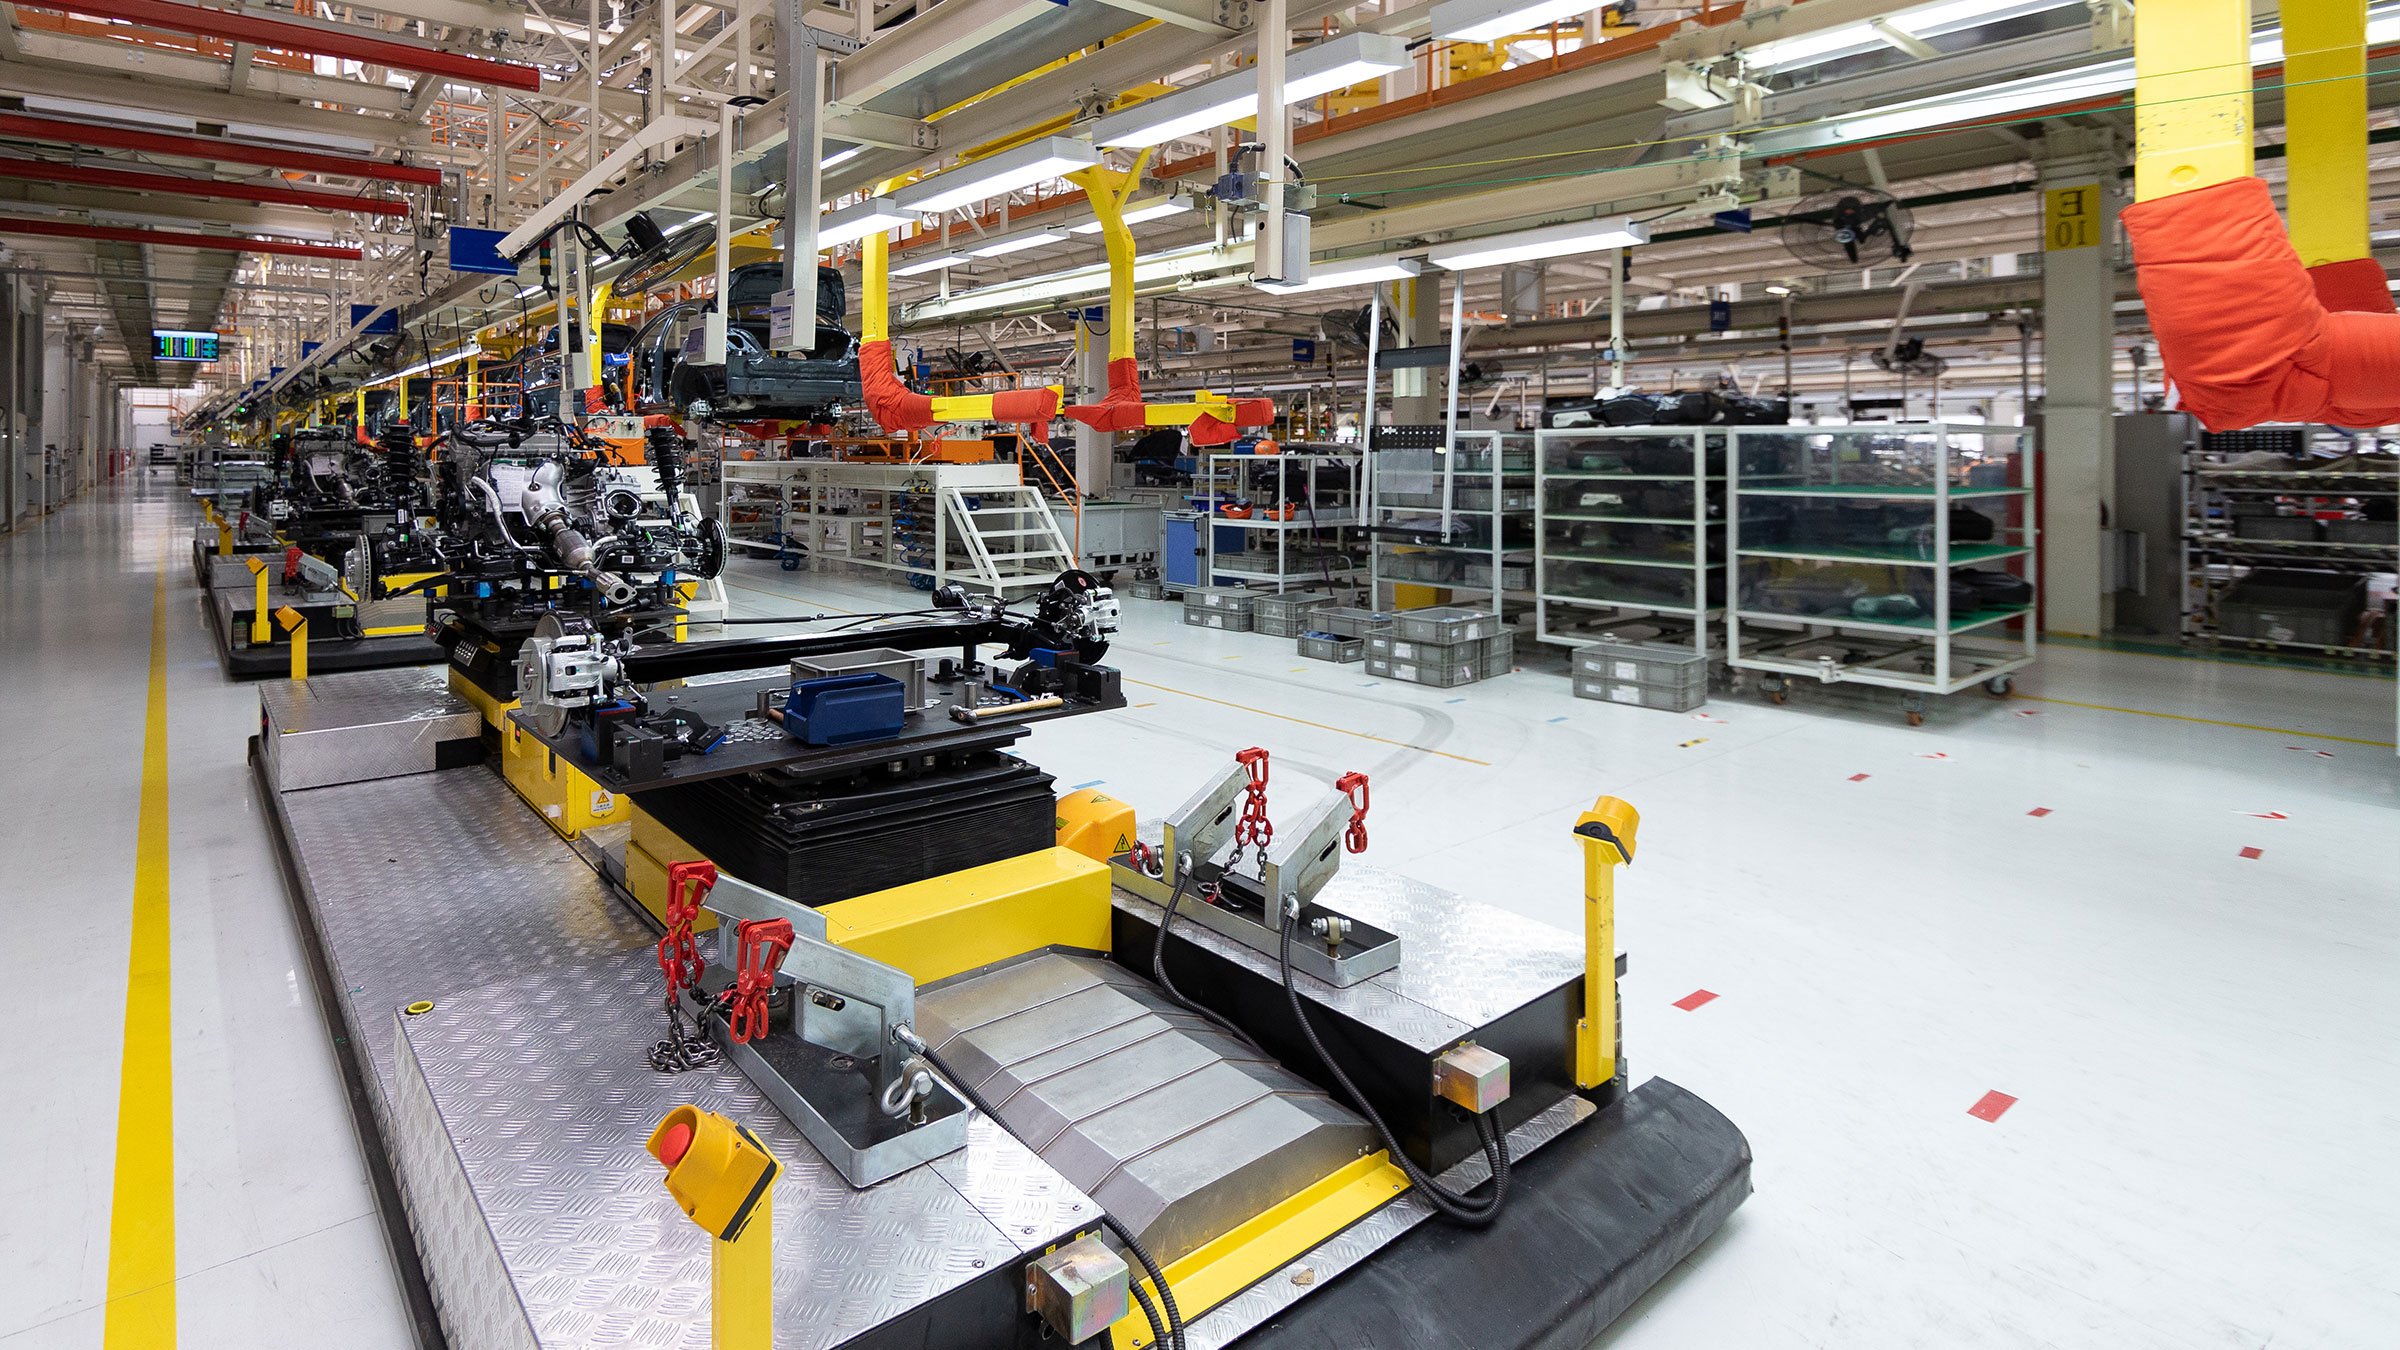  automated-car-assembly-line-plant-automotive-industry-shop-production-assembly-machines-new-car-warehouse